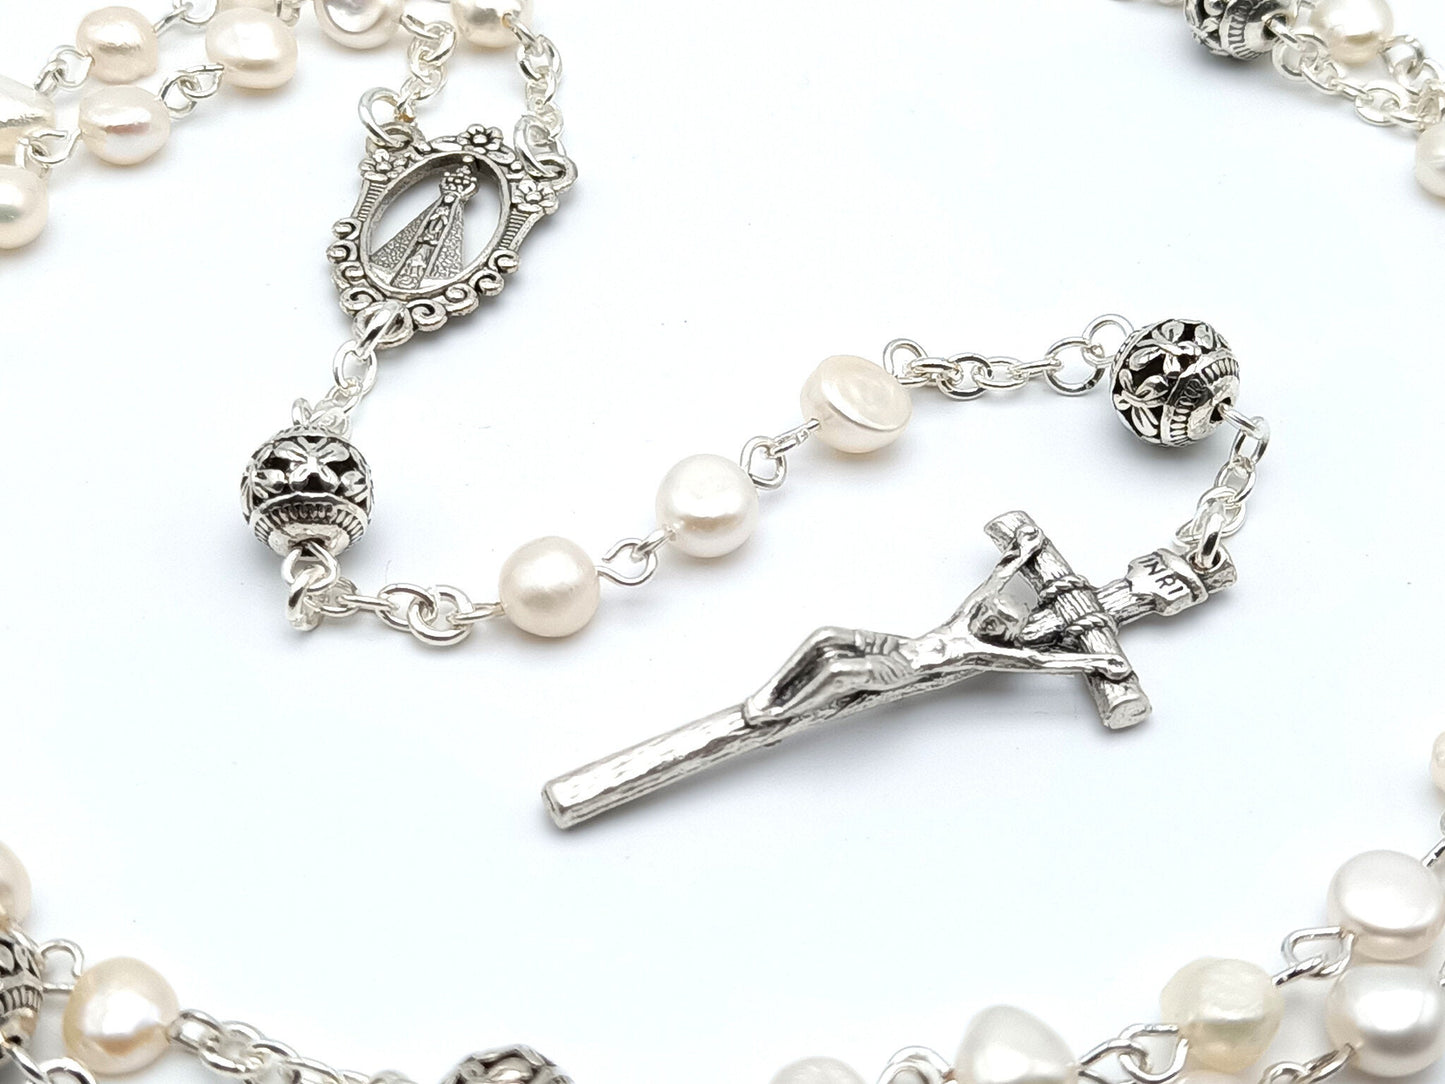 Our Lady of Loretto unique rosary beads with fresh water pearl beads, silver crucifix, pater beads and centre medal.